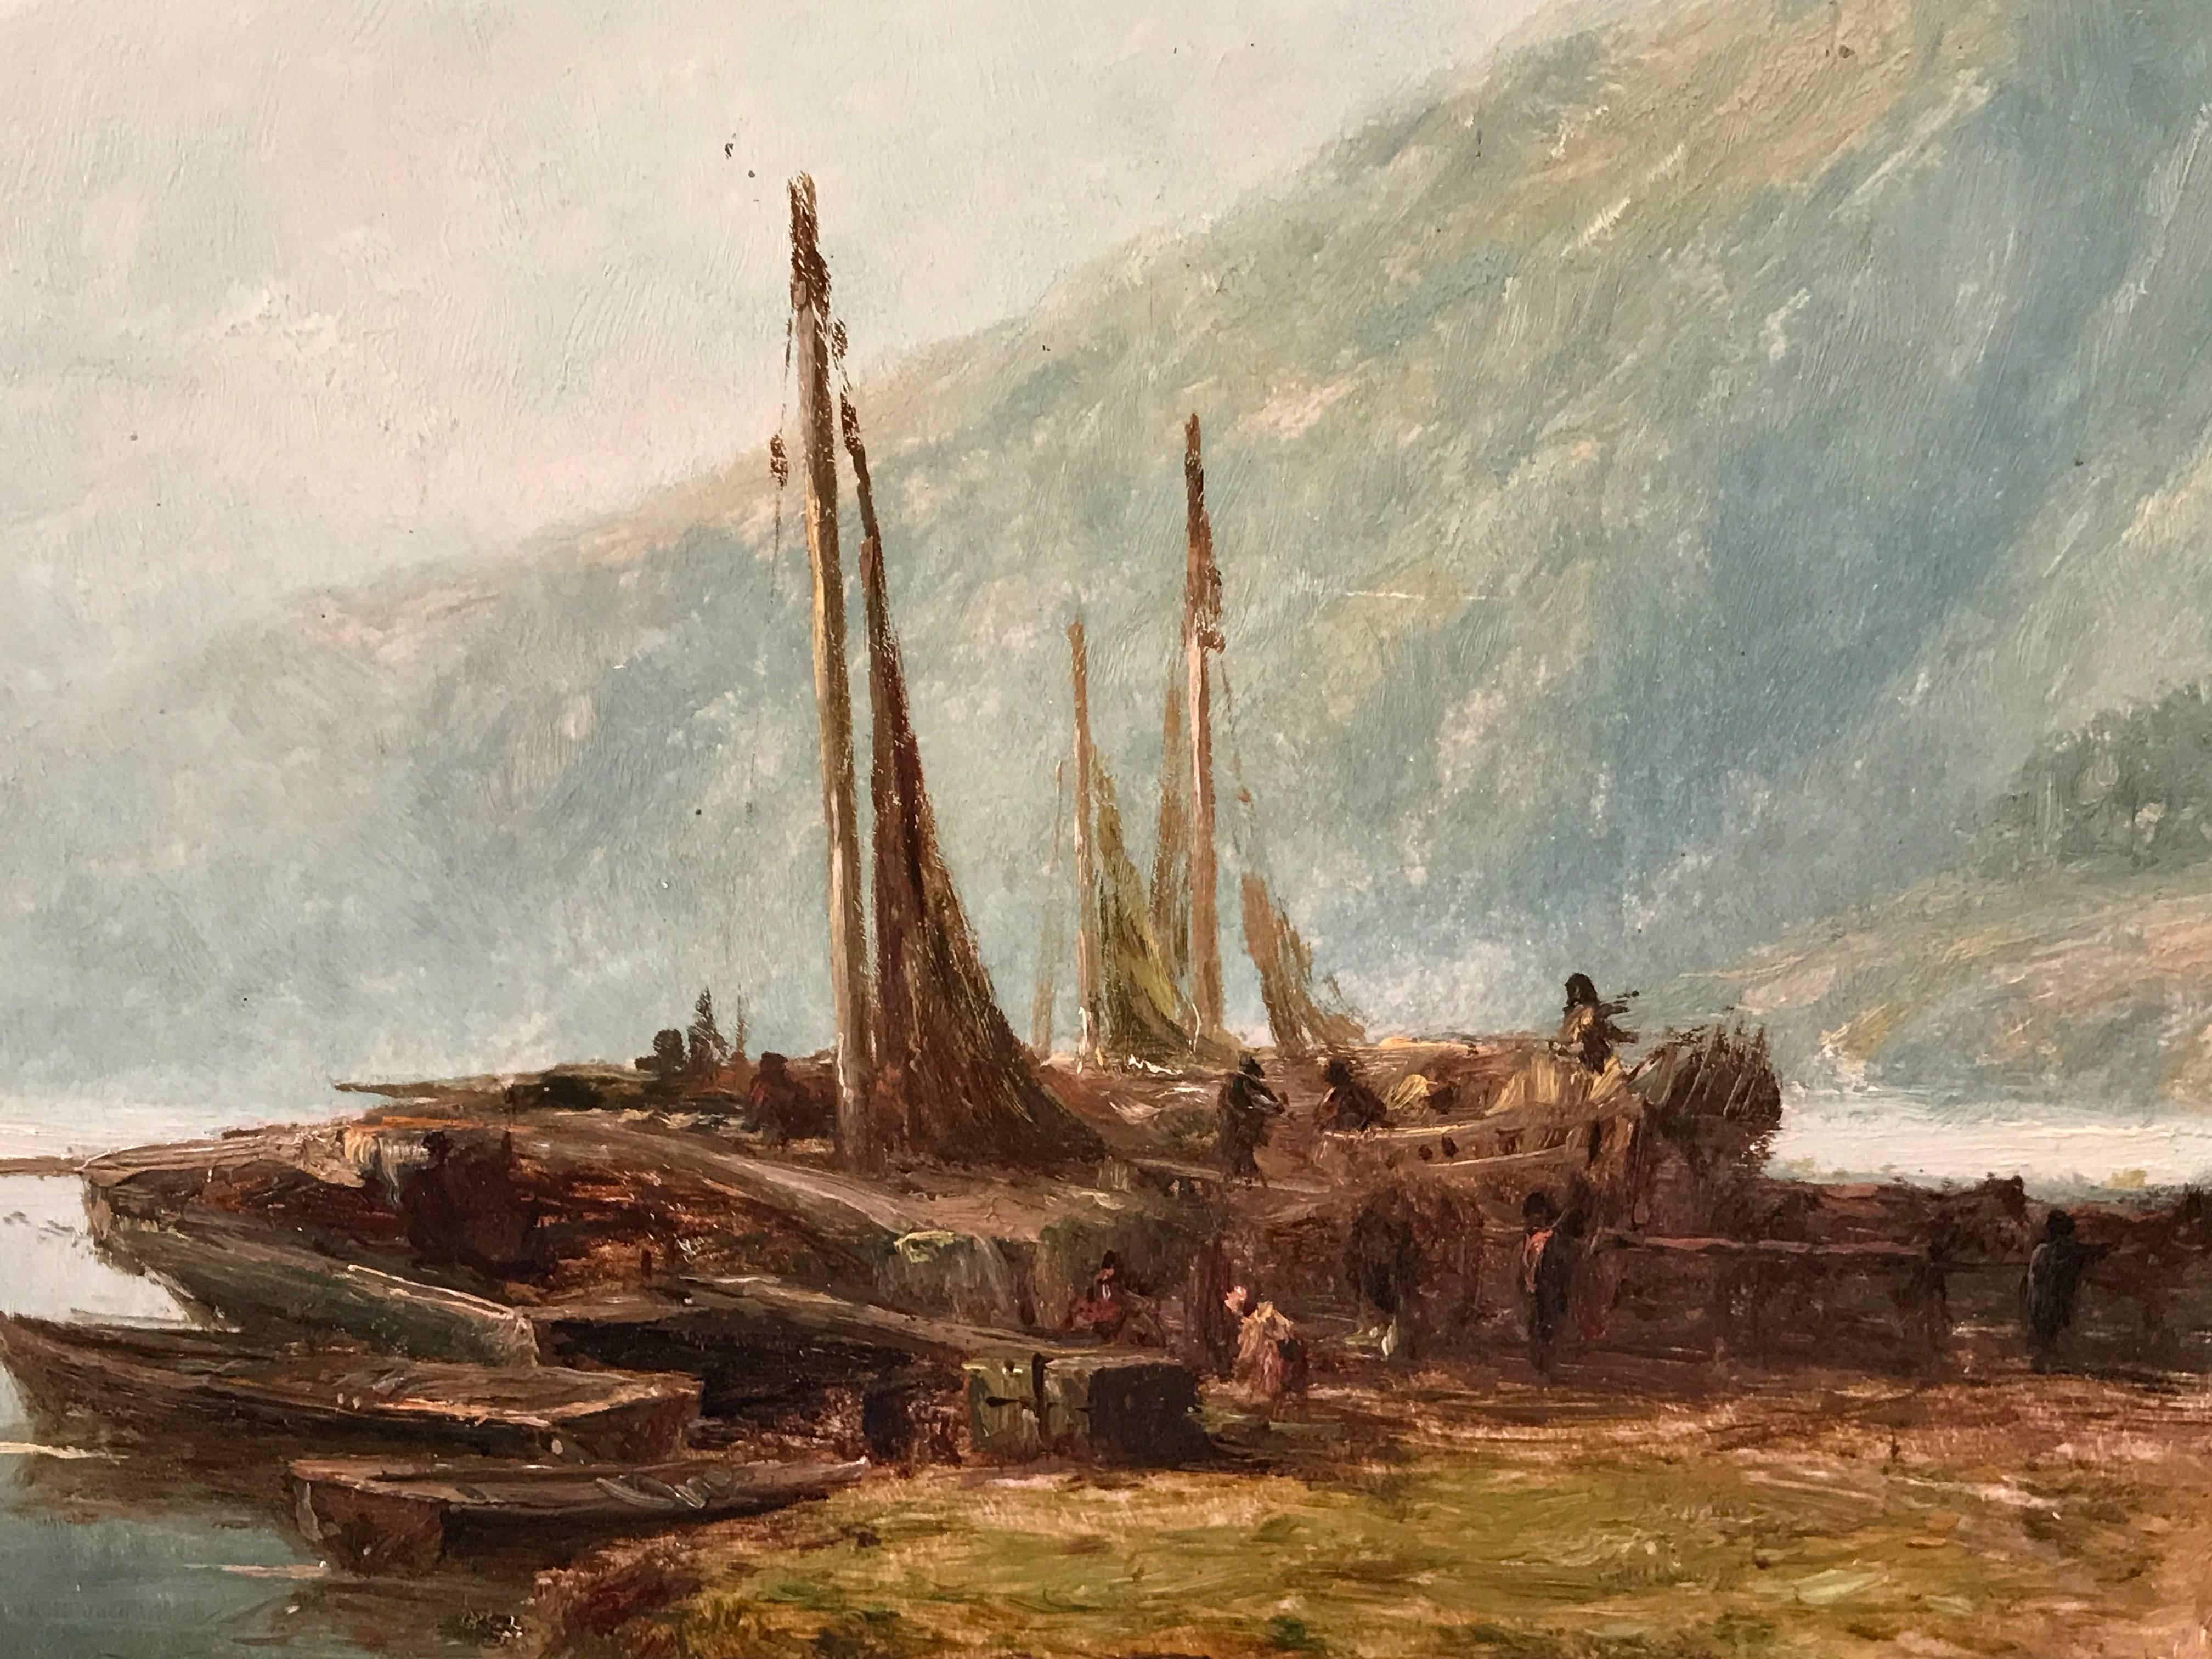 Loch Lomond Fishing Boats 19th Century Oil Painting - Gray Landscape Painting by Harry Armstrong Whittle